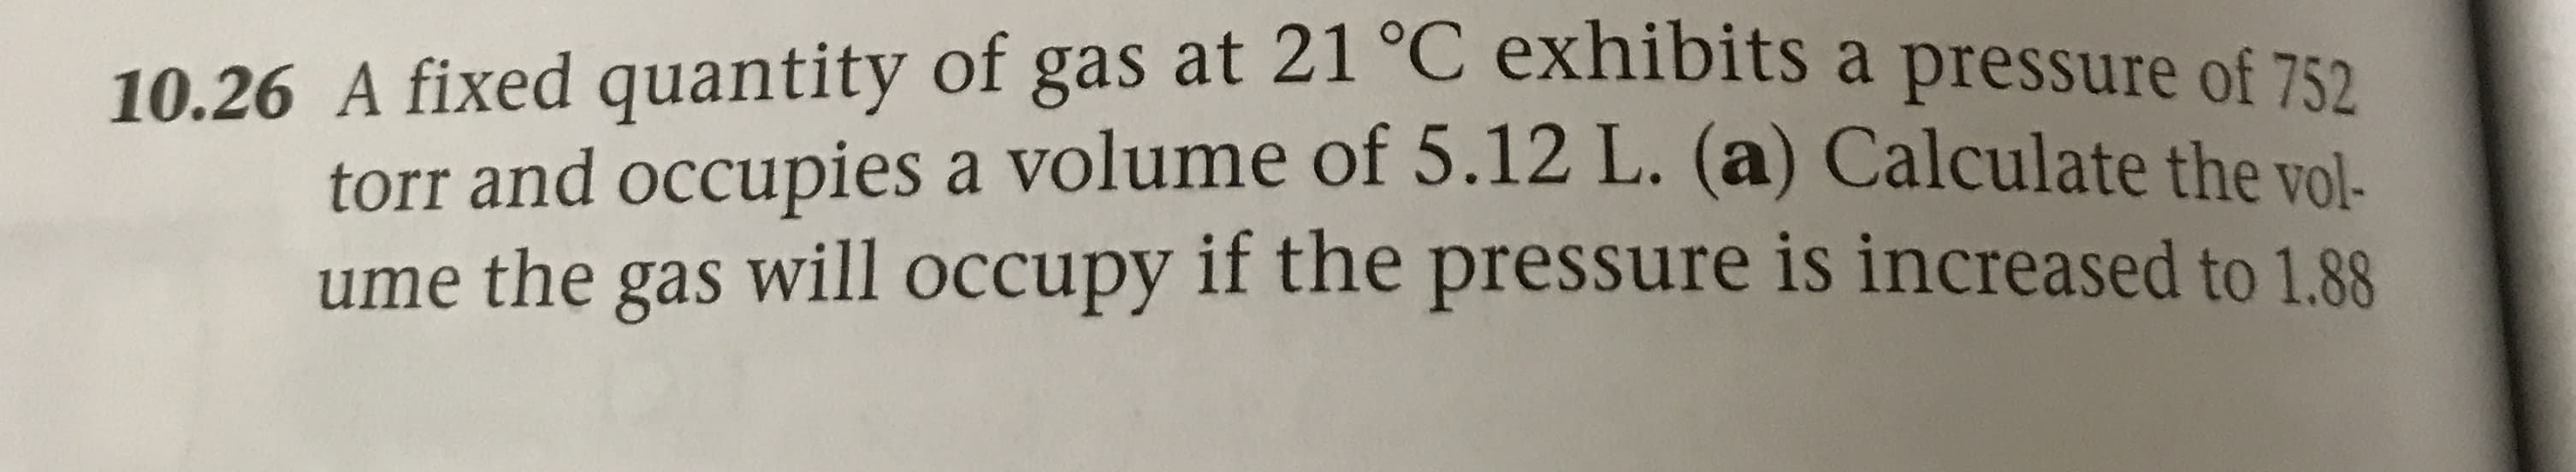 10.26 A fixed quantity of gas at 21 C exhibits a pressure of 752
torr and occupies a volume of 5.12 L. (a) Calculate the vol-
ume the gas will occupy if the pressure is increased to 1.88
